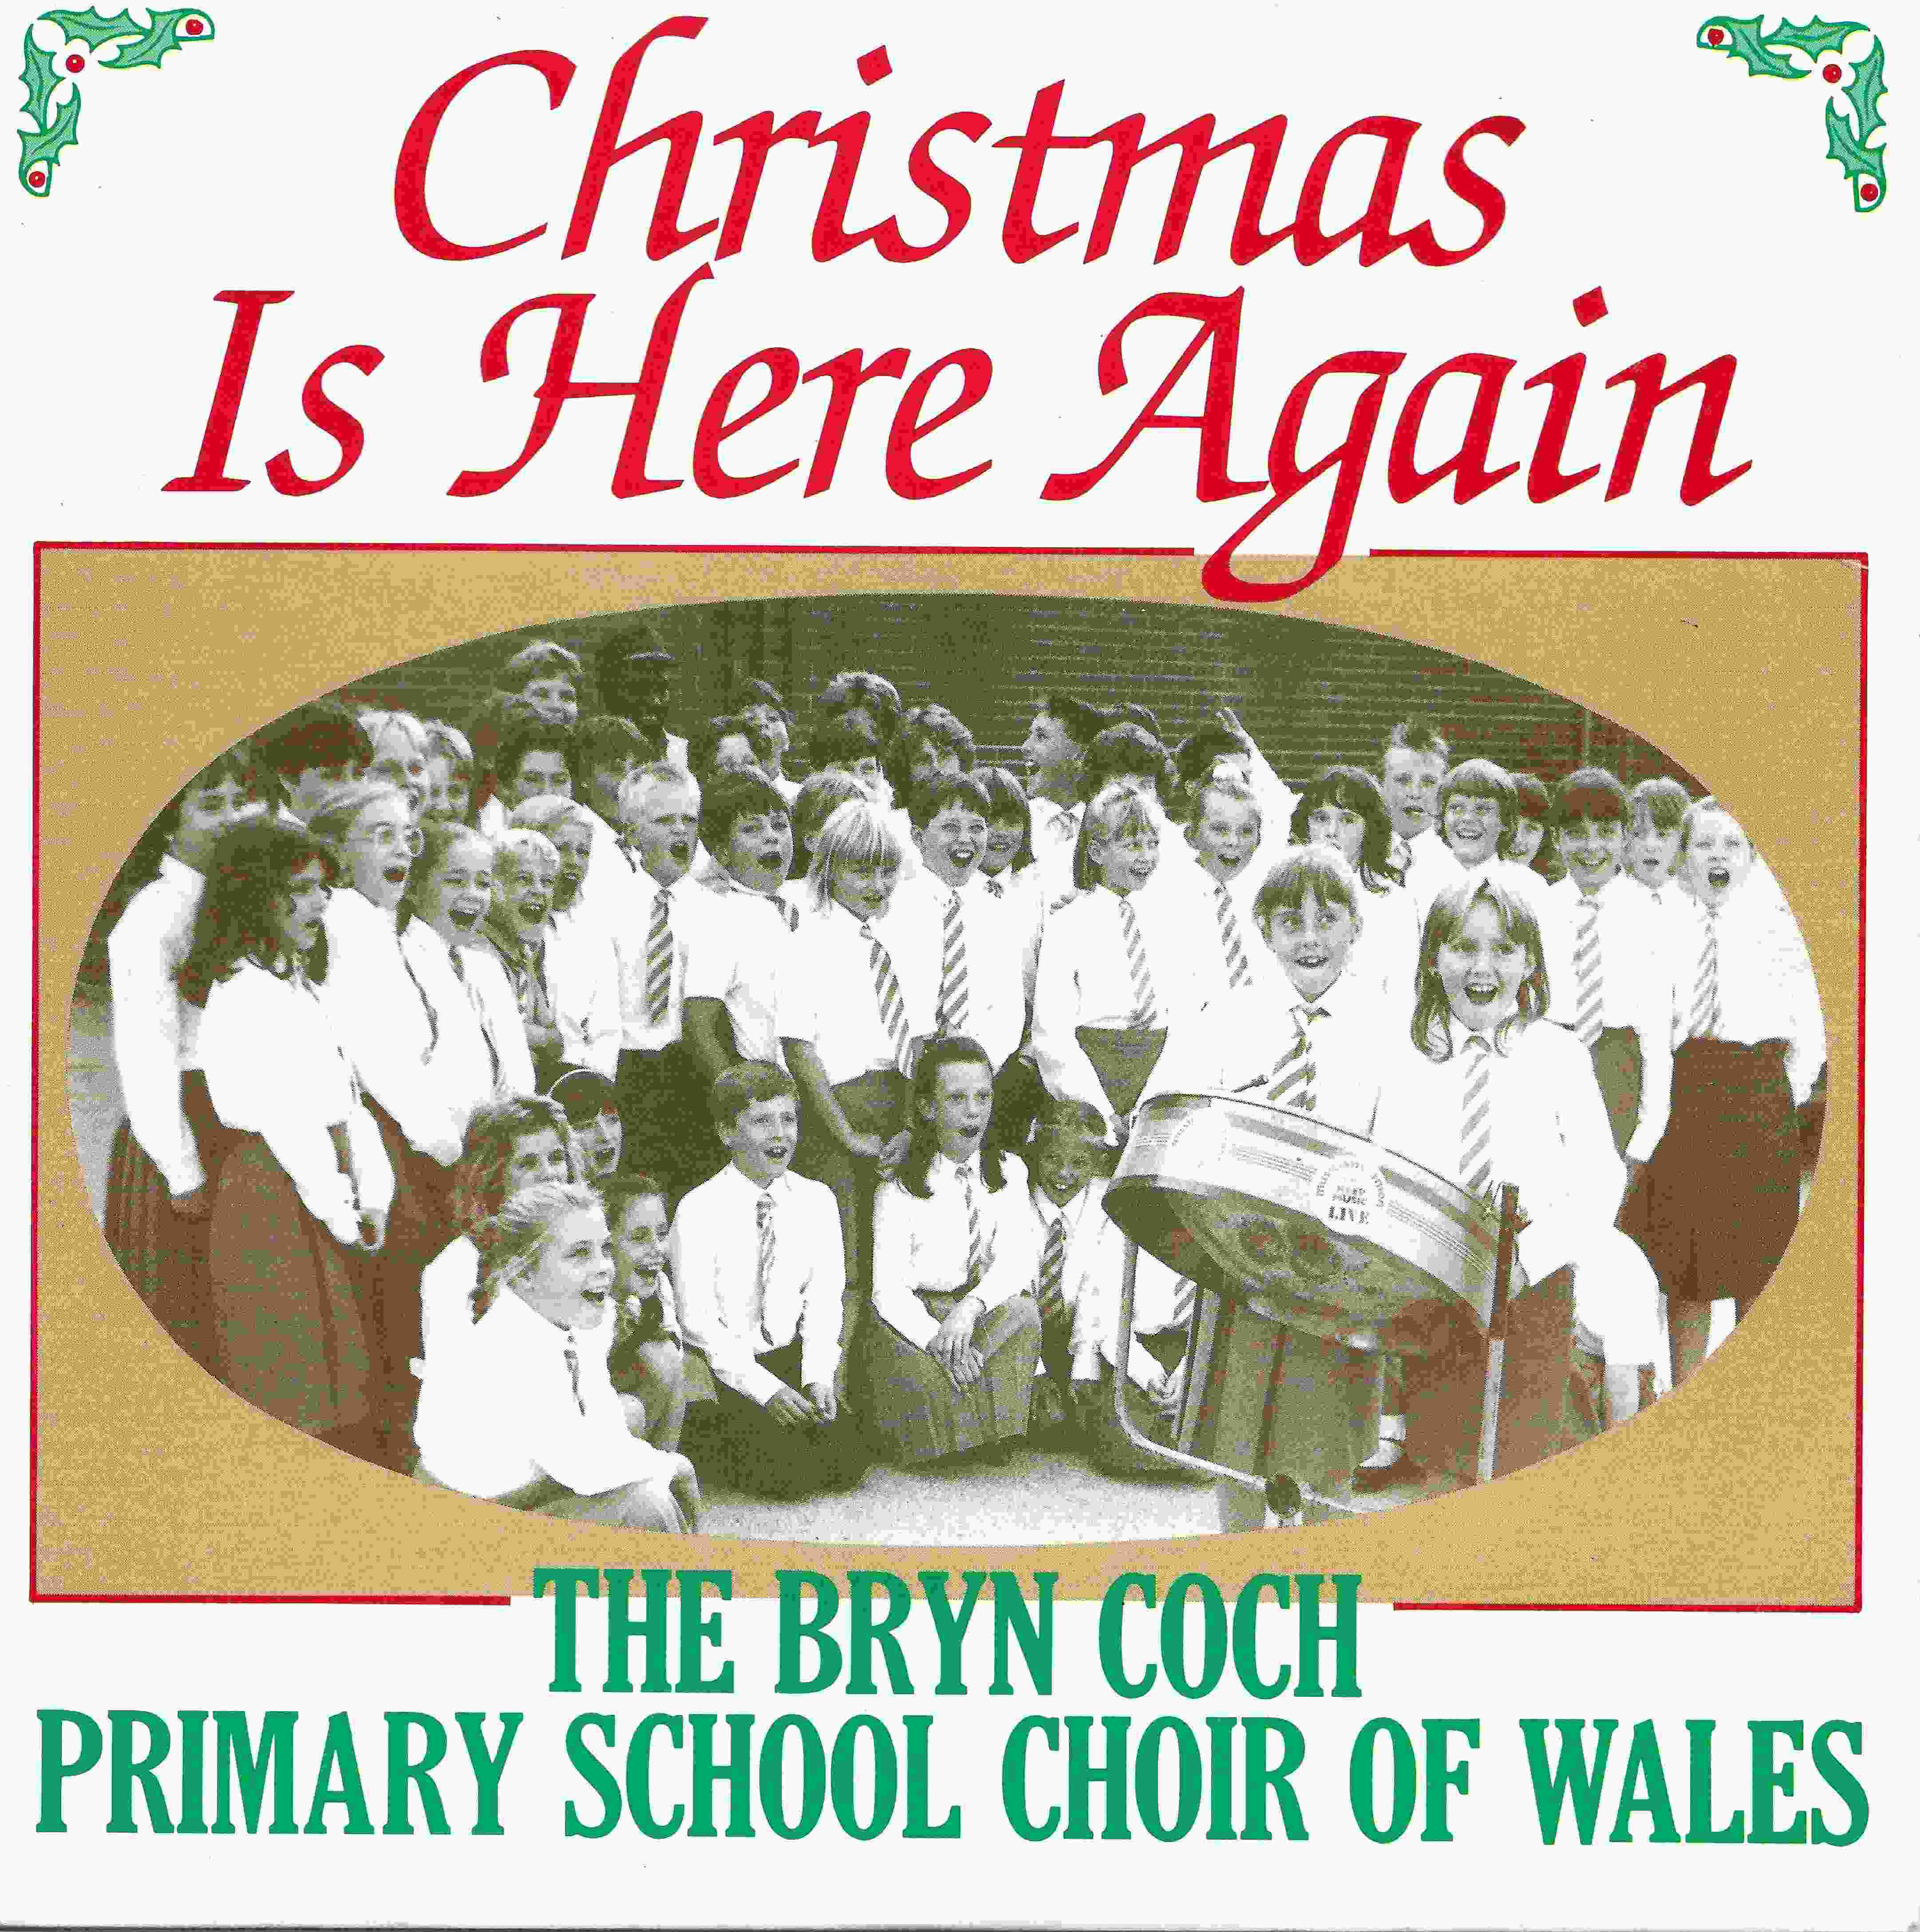 Picture of RESL 234 Christmas is here again by artist The Bryn Coch Primary School Choir of Wales from the BBC records and Tapes library